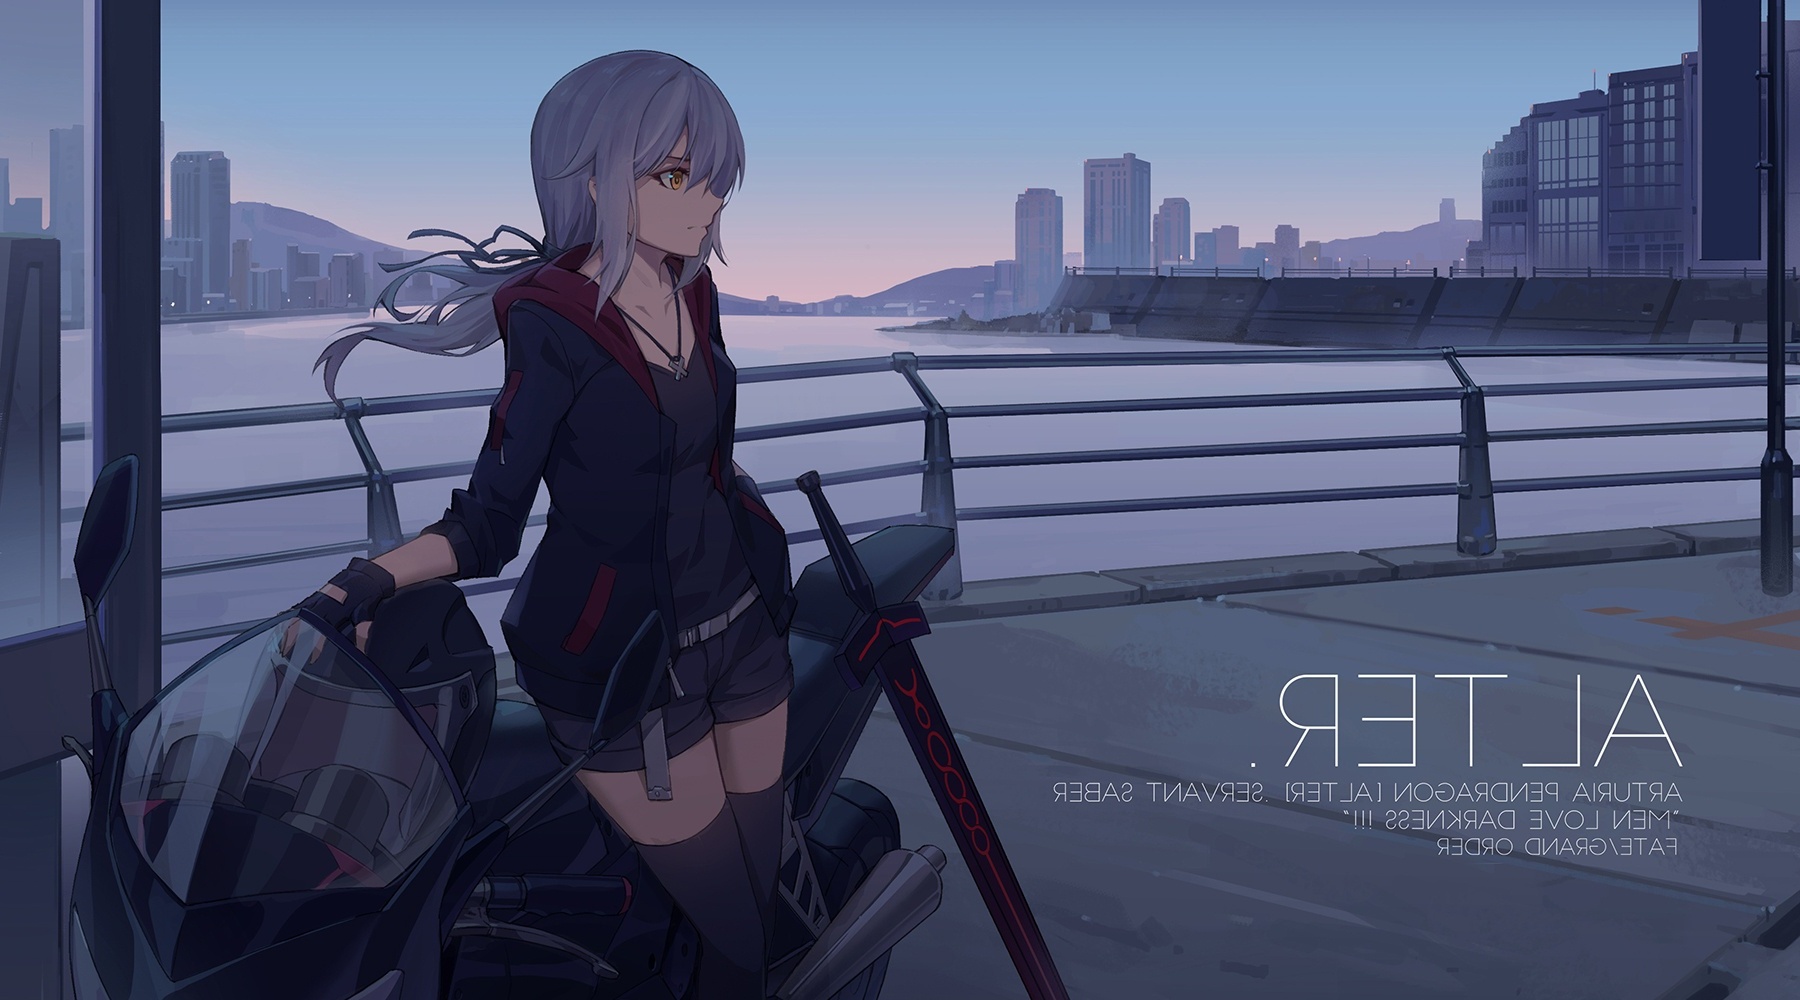 Wallpaper Saber Sword Ponytail Fate Grand Order Buildings Motorcycle Resolution 1800x1000 Wallpx